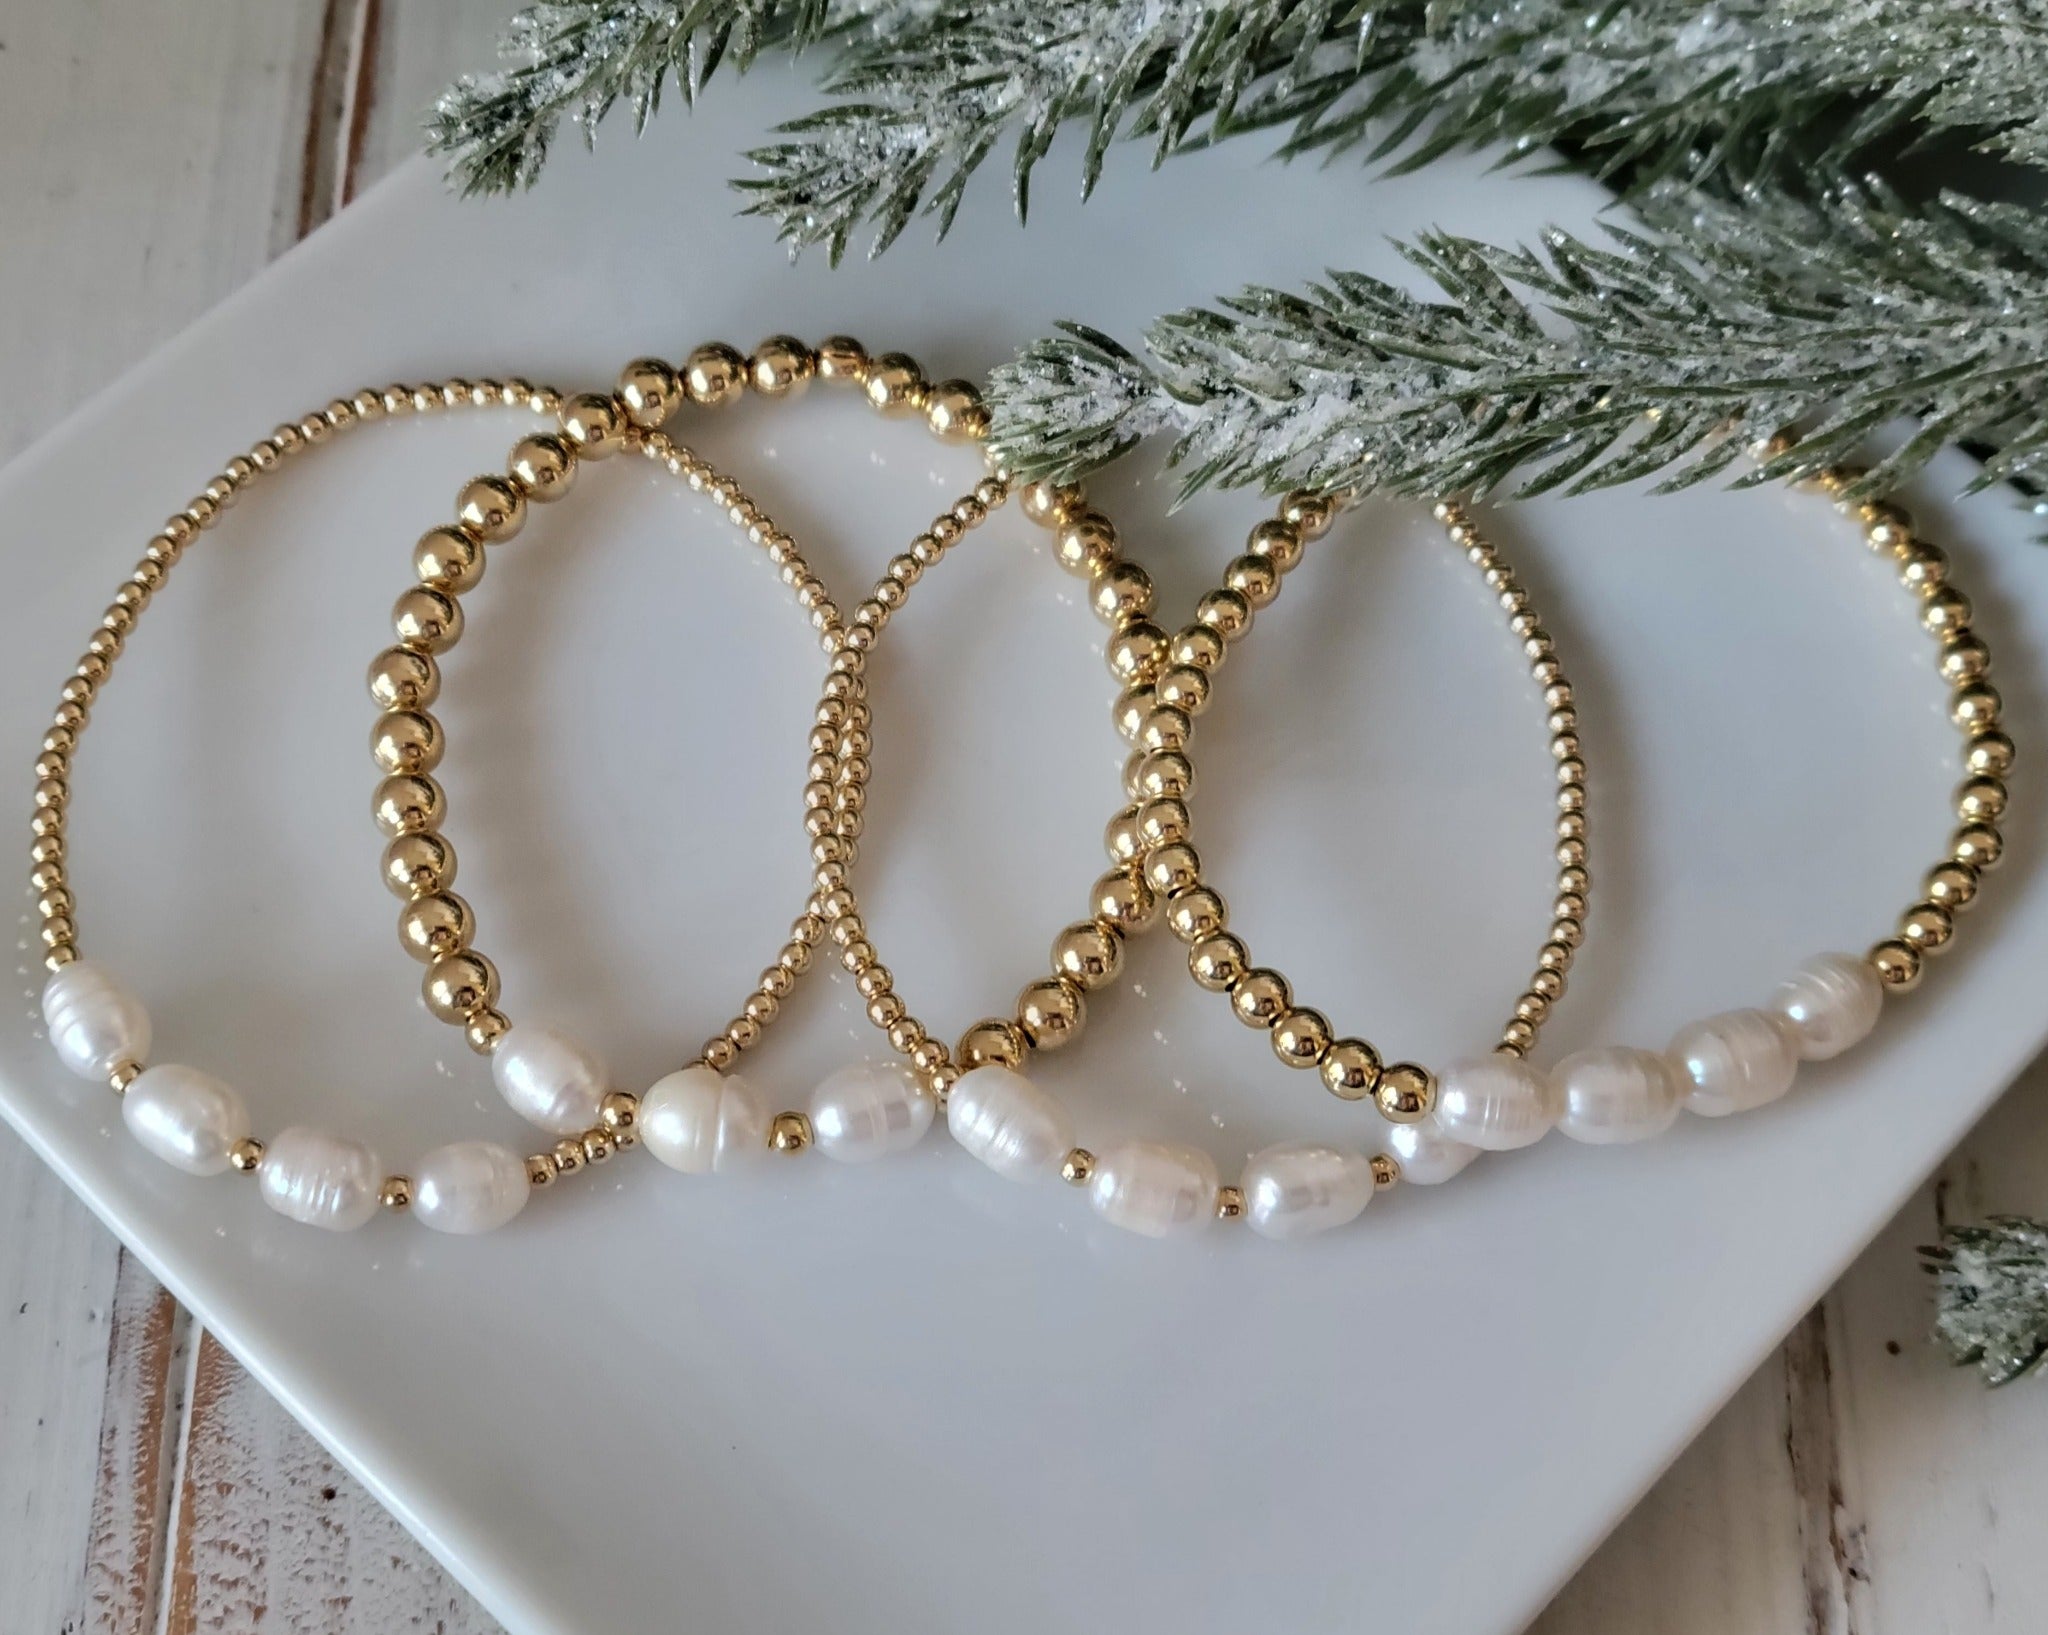 Beaded and Raw Pearl Layering Bracelet - Sterling or Gold